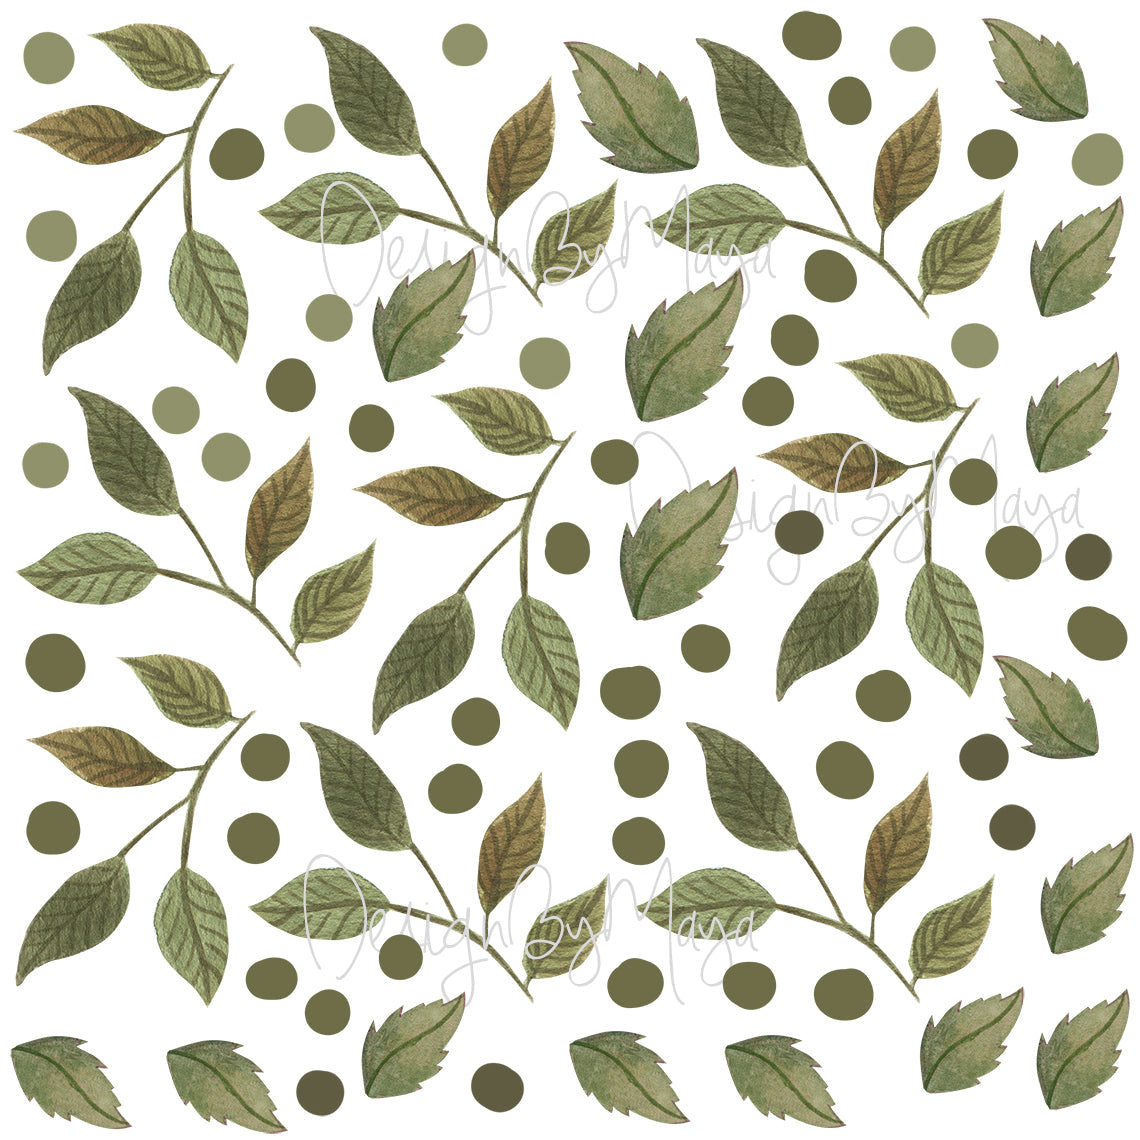 Watercolor Foliage and Leaves - Fabric Nursery Wall Art Decals